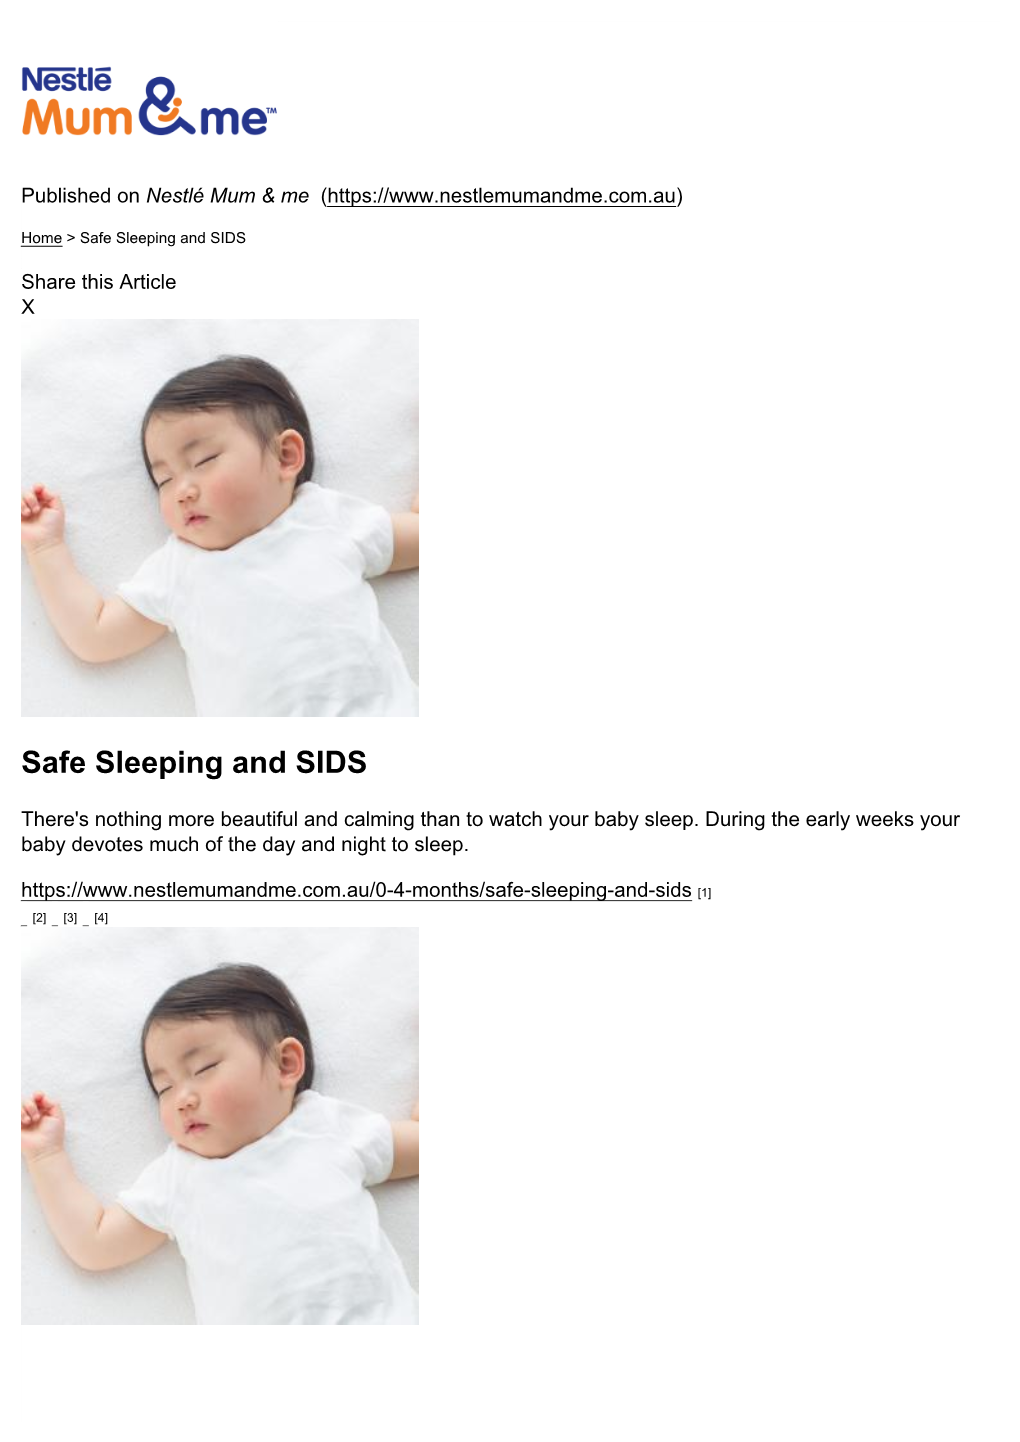 Safe Sleeping and SIDS